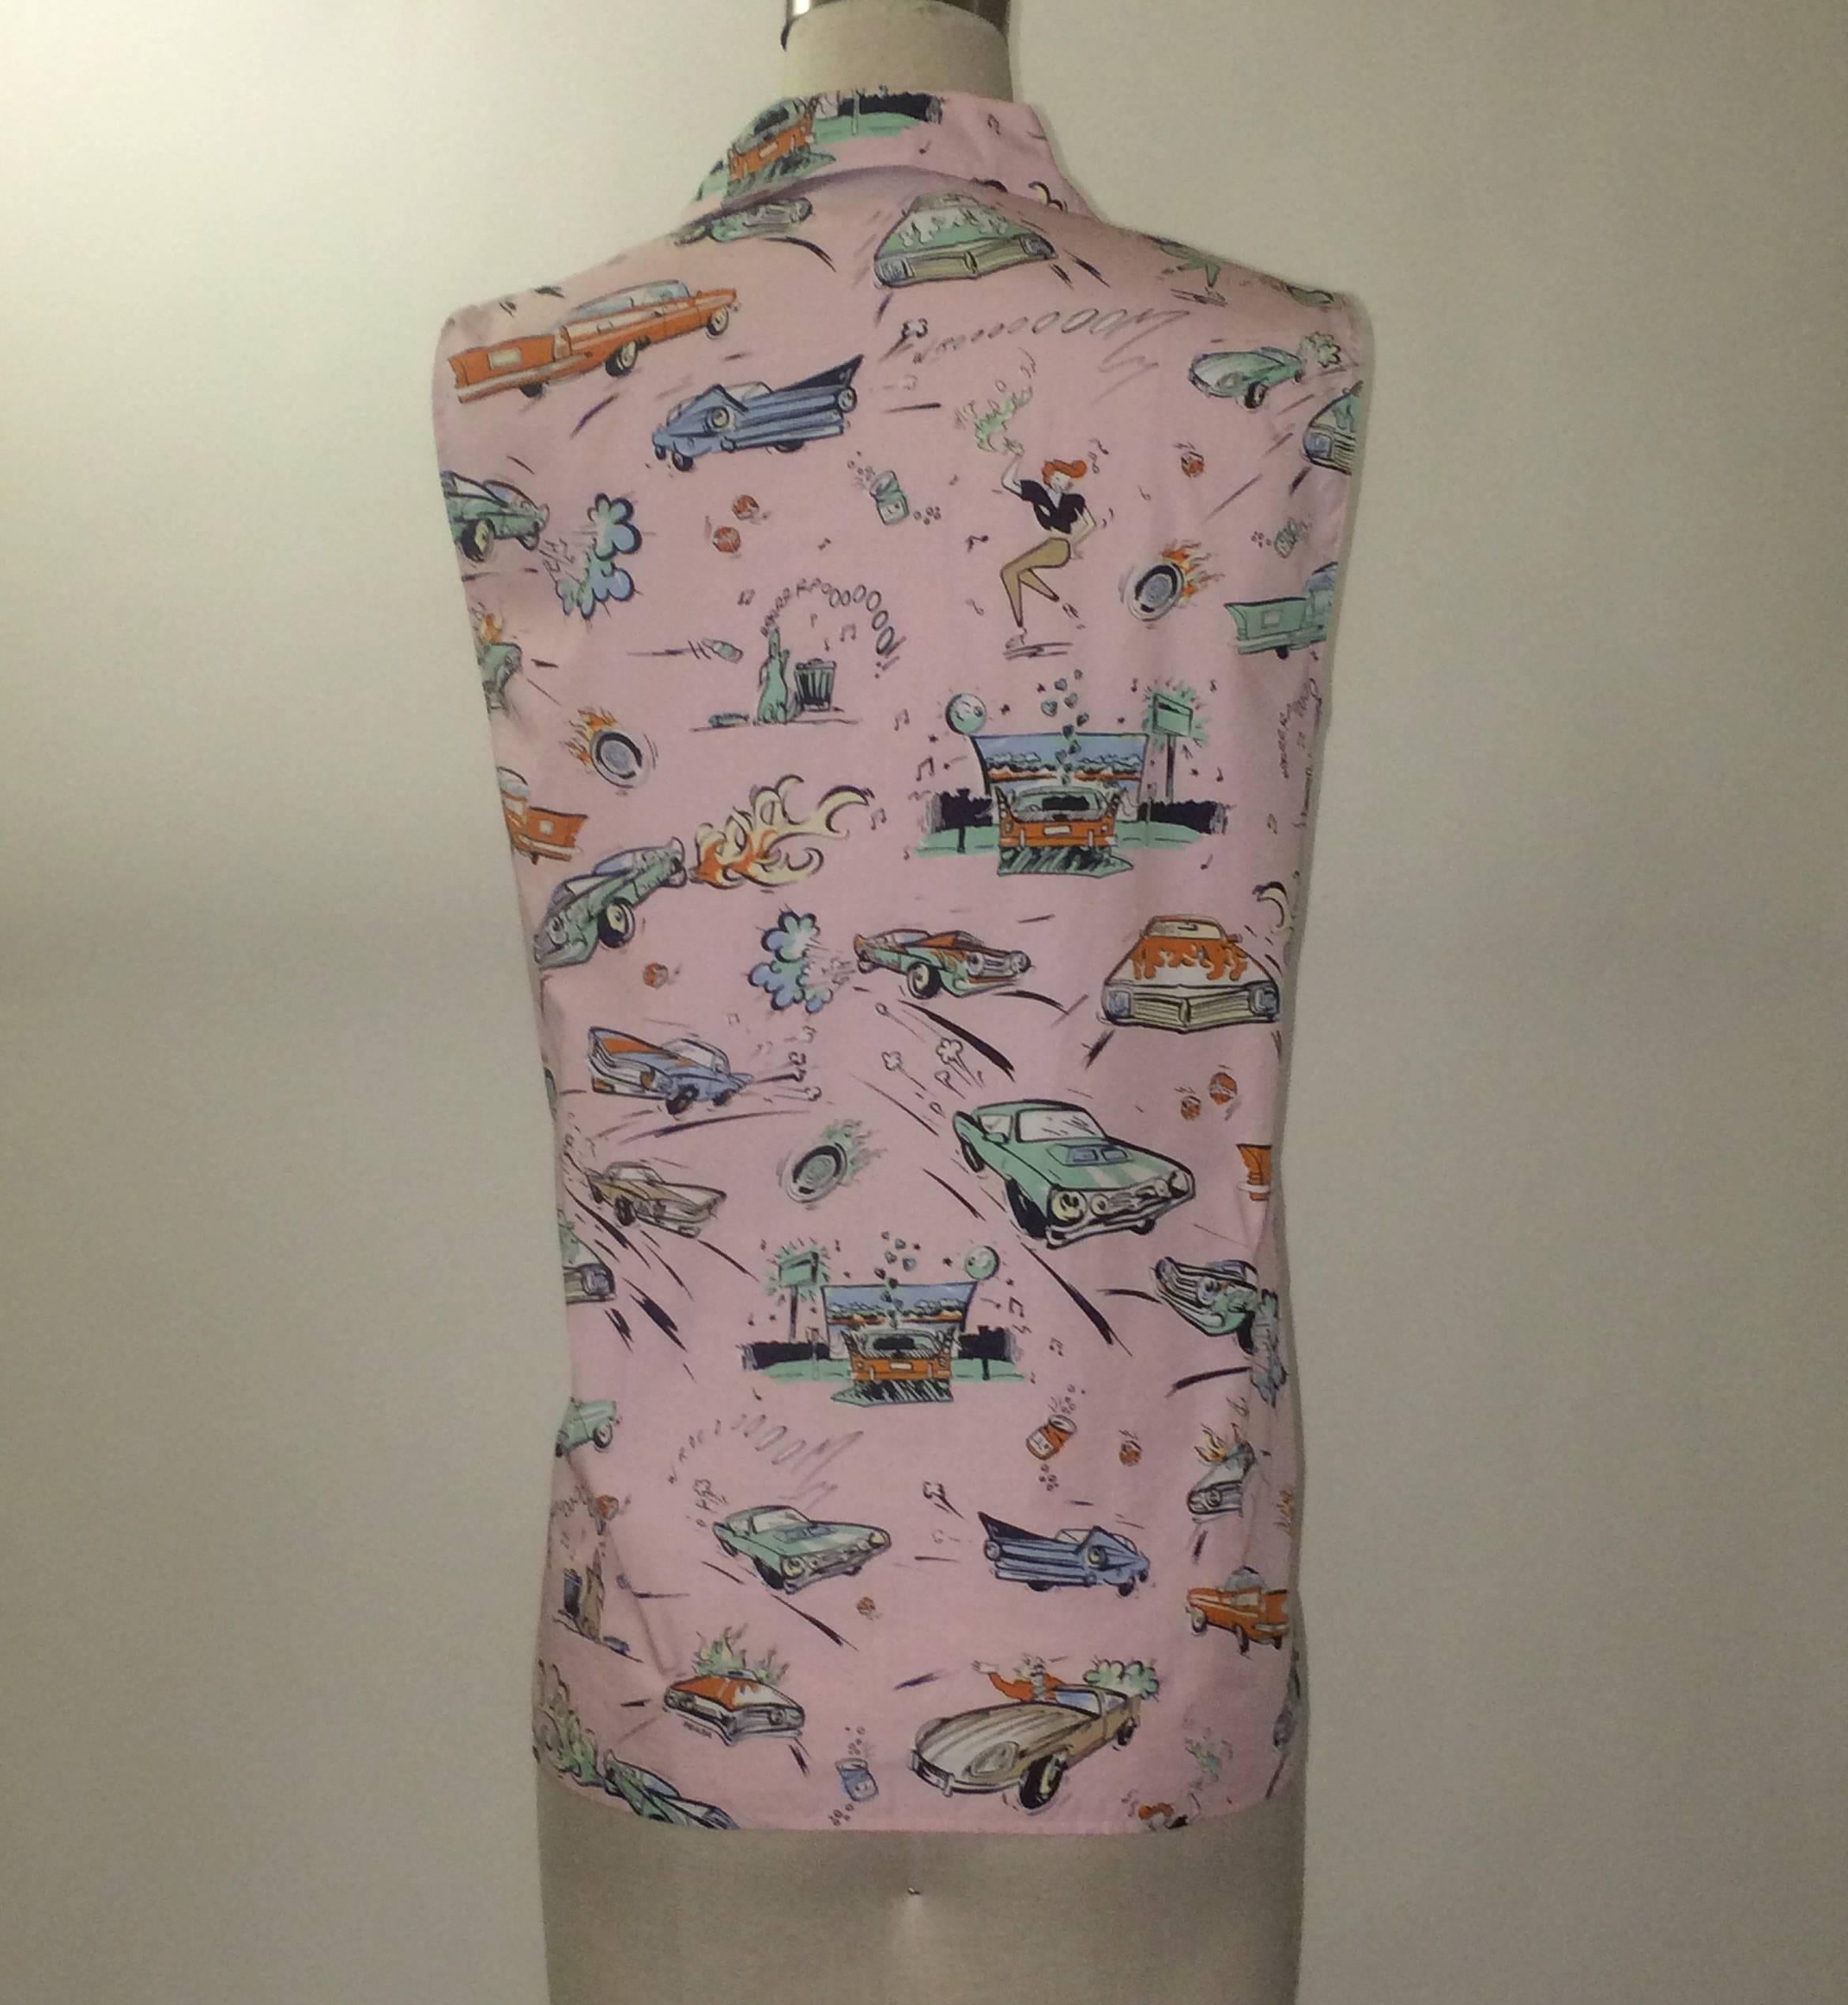 Prada pink hot rod print sleeveless blouse. Buttons up front with cloth covered buttons. Looks great tied at waist and paired with a dark skinny jean or full skirt.

100% cotton.

Made in Italy.

Size IT 42, approximate US 6.
Bust 36